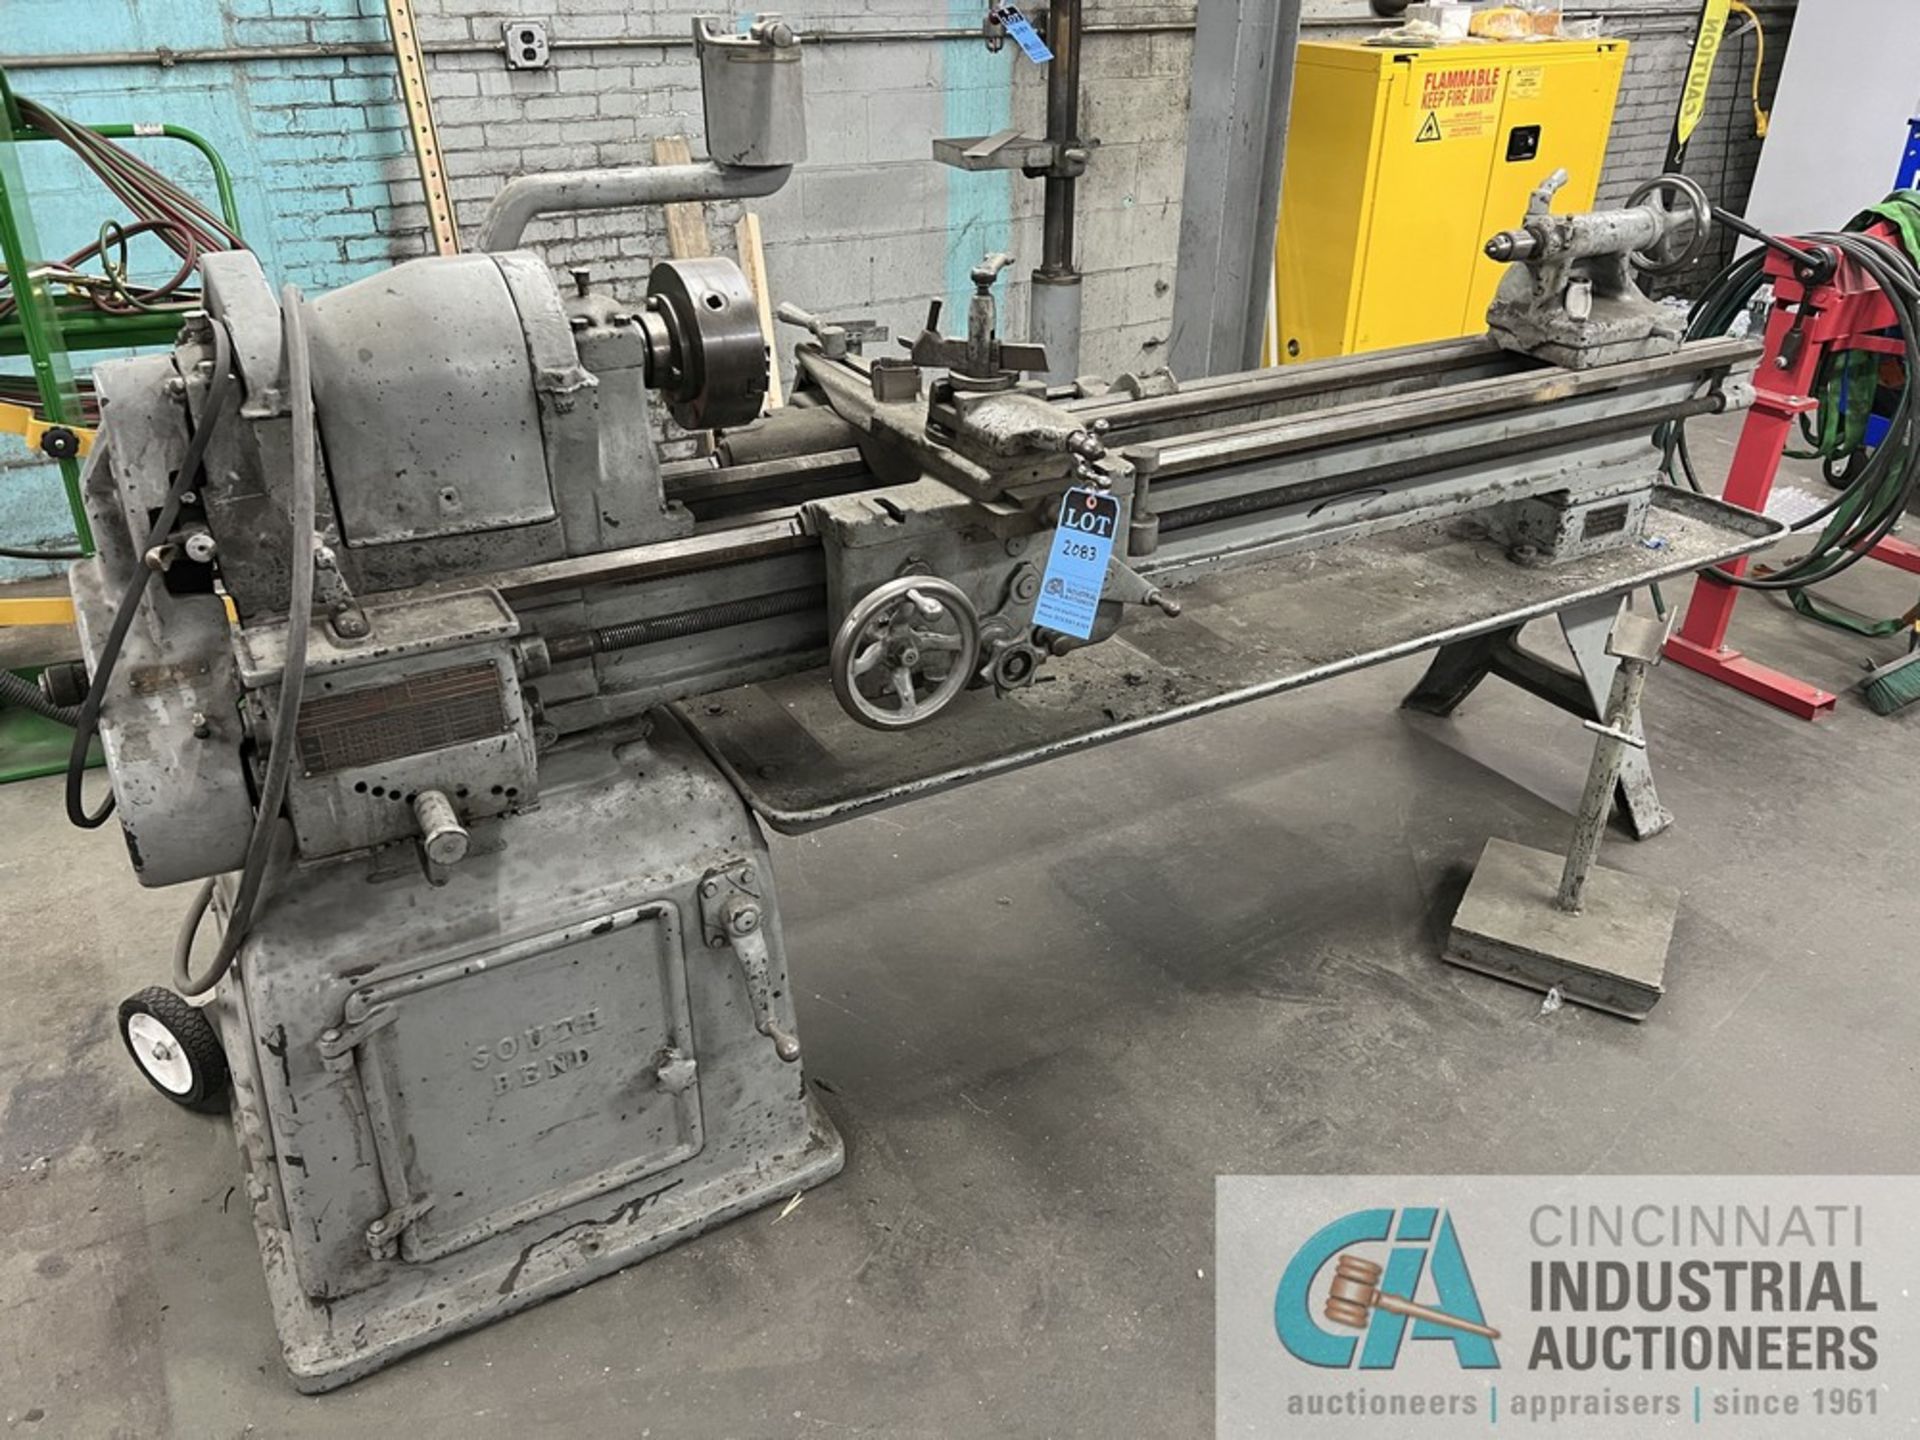 16" X 56" SOUTH BEND ENGINE LATHE; S/N 50199, 7-1/2" 3-JAW CHUCK, TOOLHOLDER, TAILSTOCK - Image 2 of 7